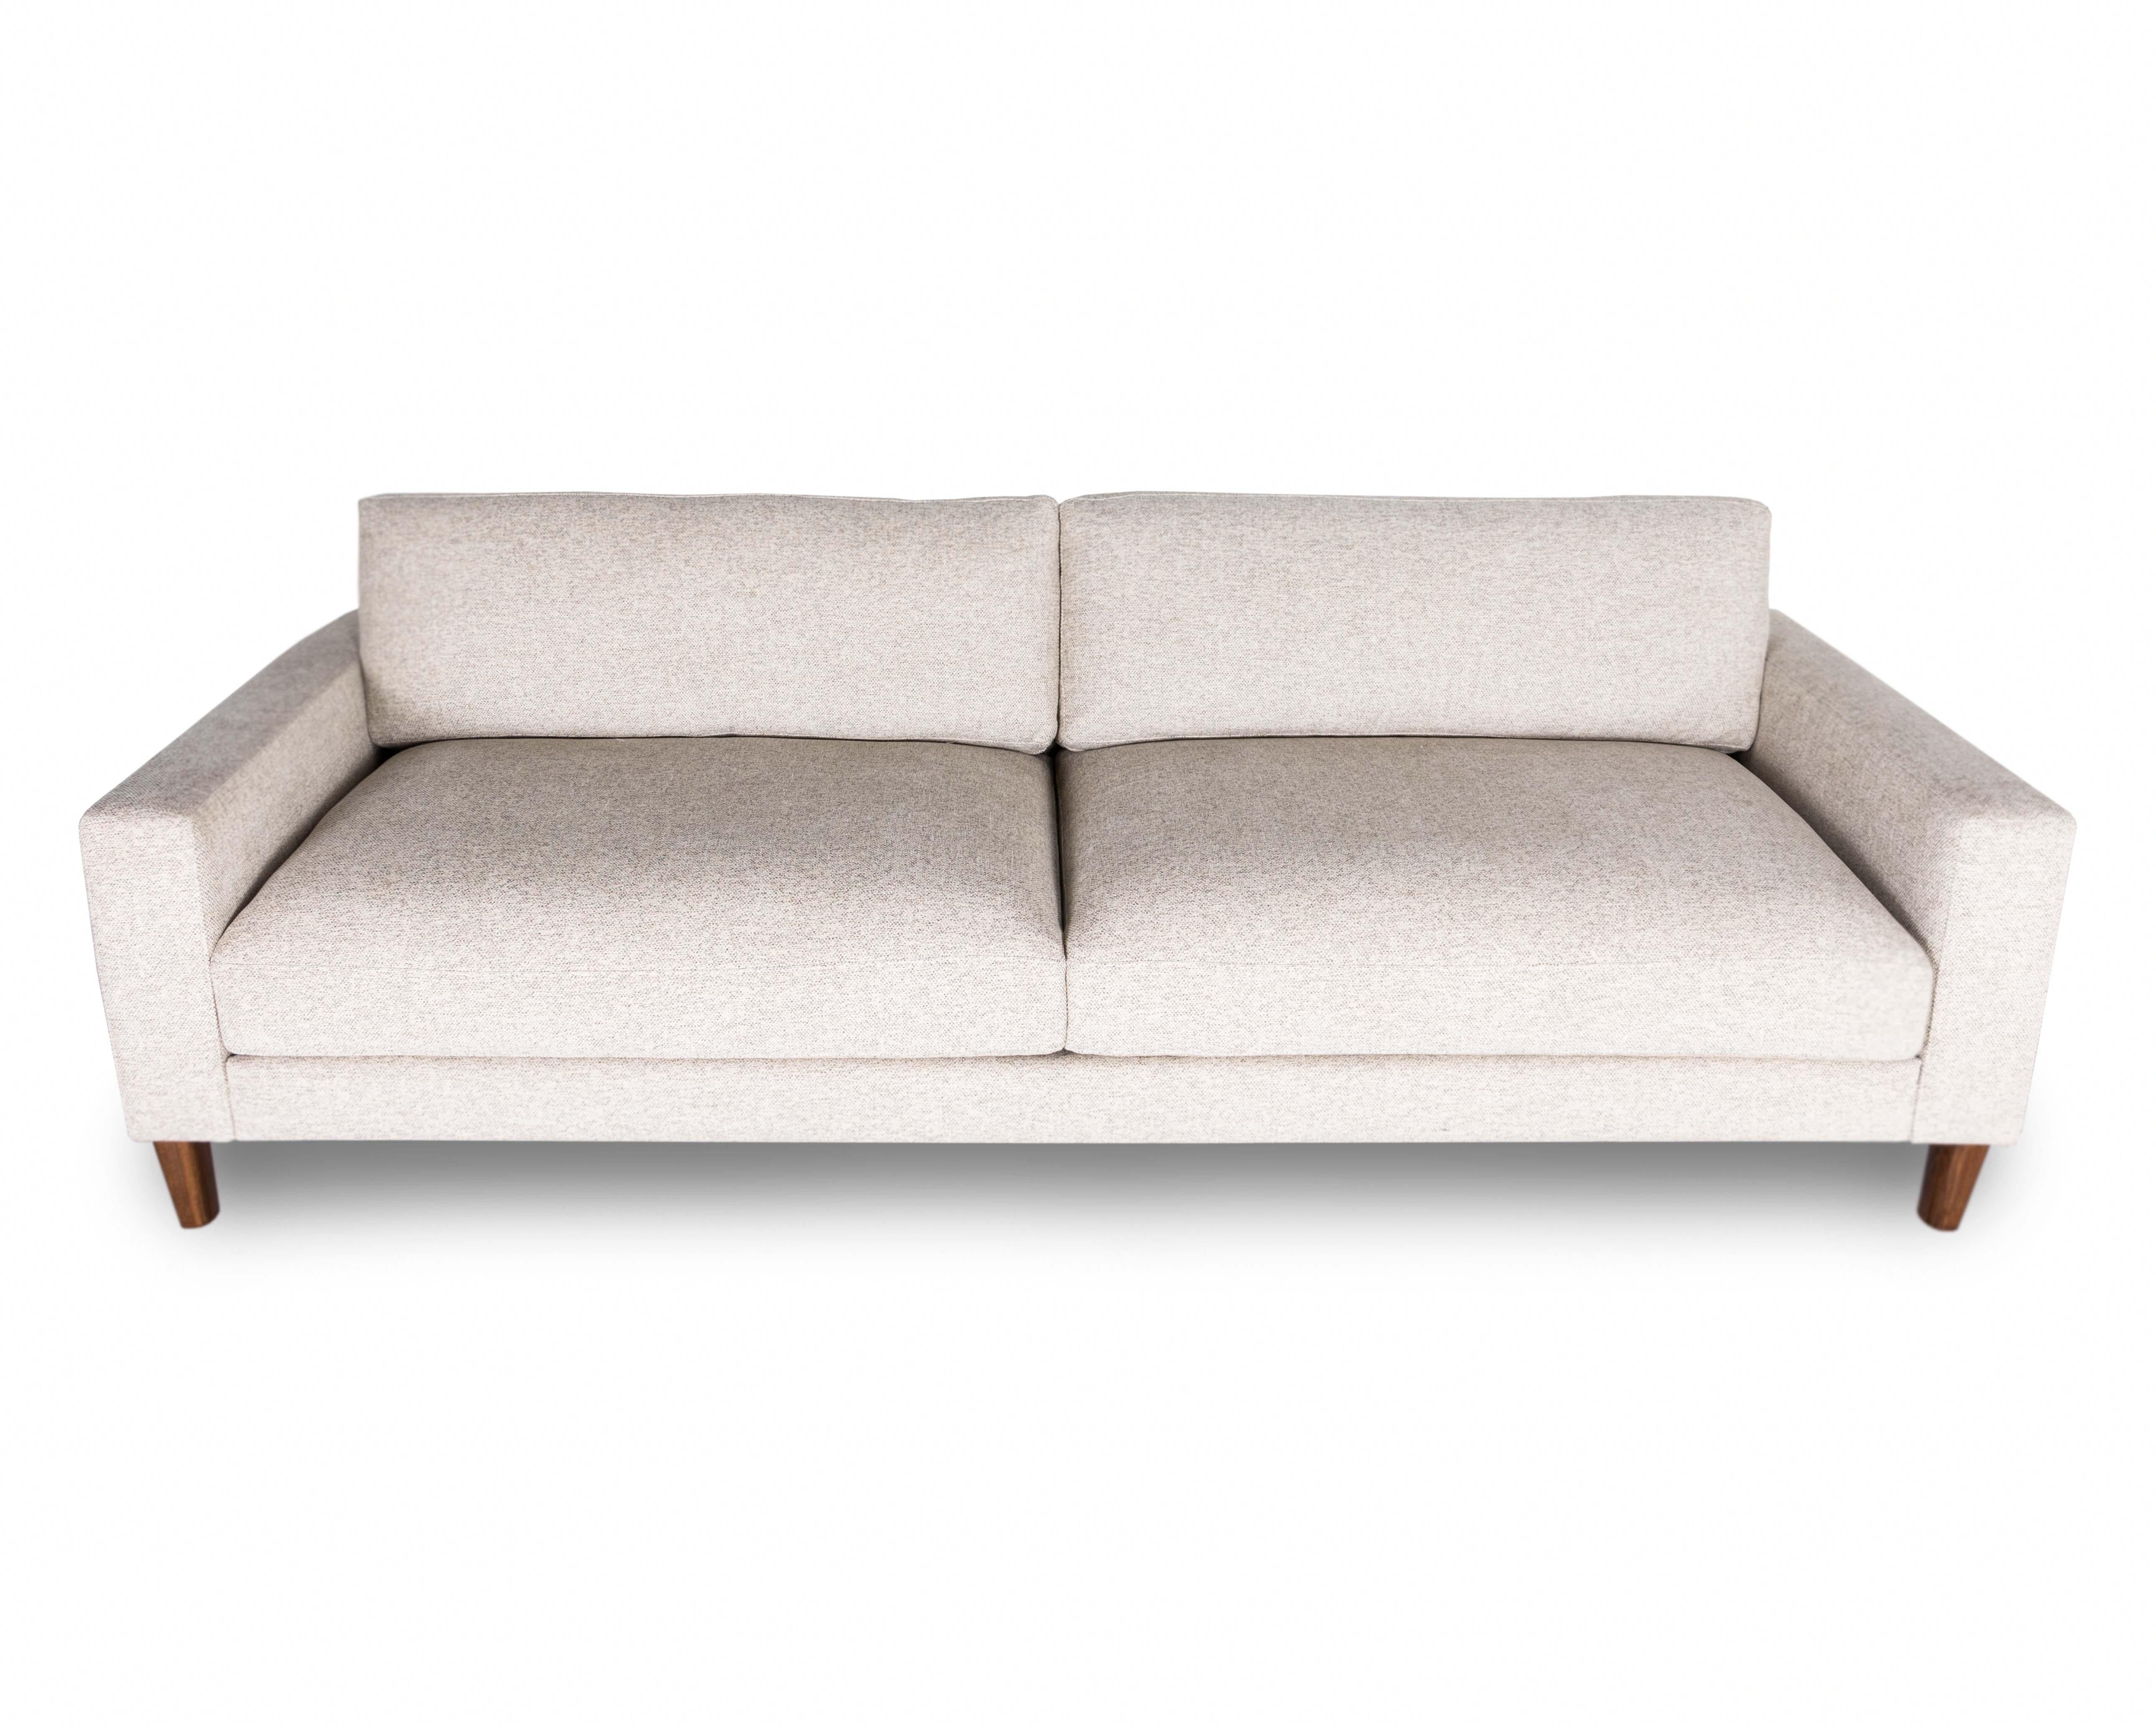 sofas with wooden legs